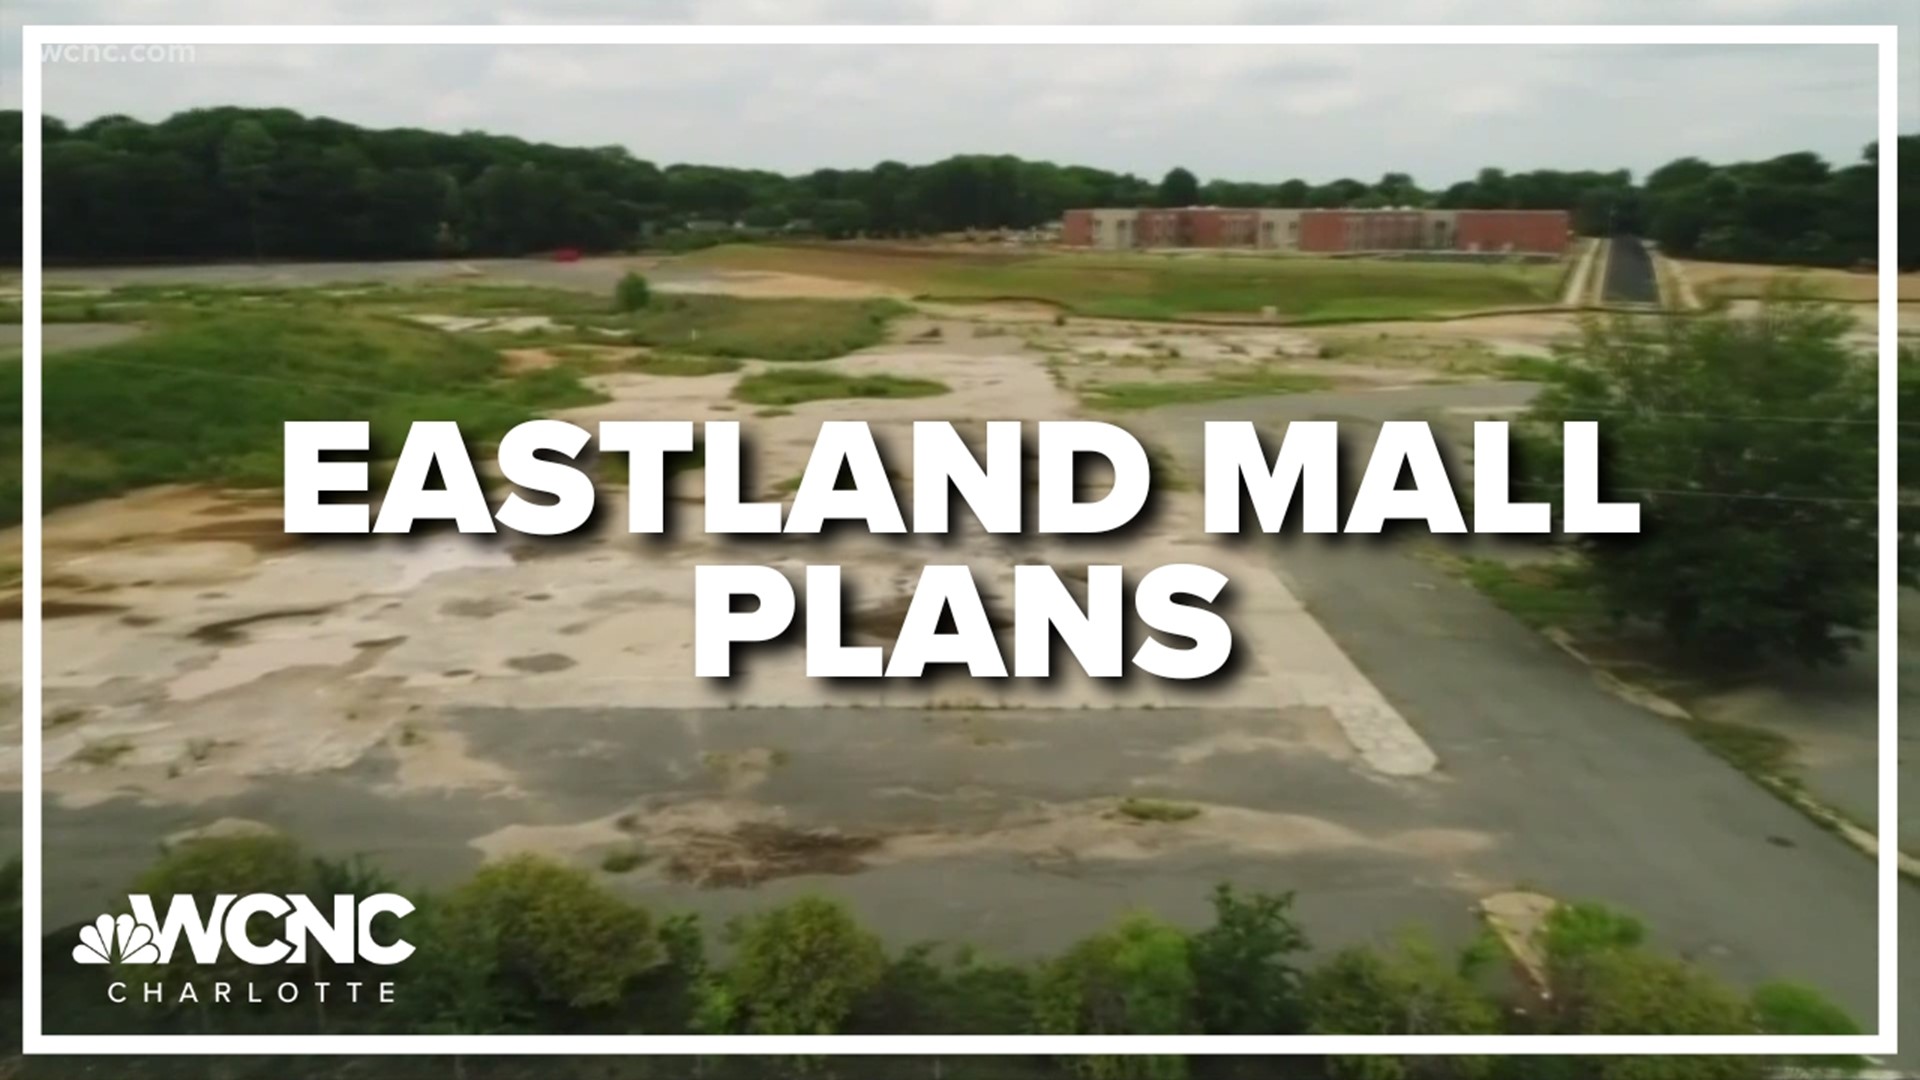 Plan for Eastland Mall site will include ice skating rink – WSOC TV